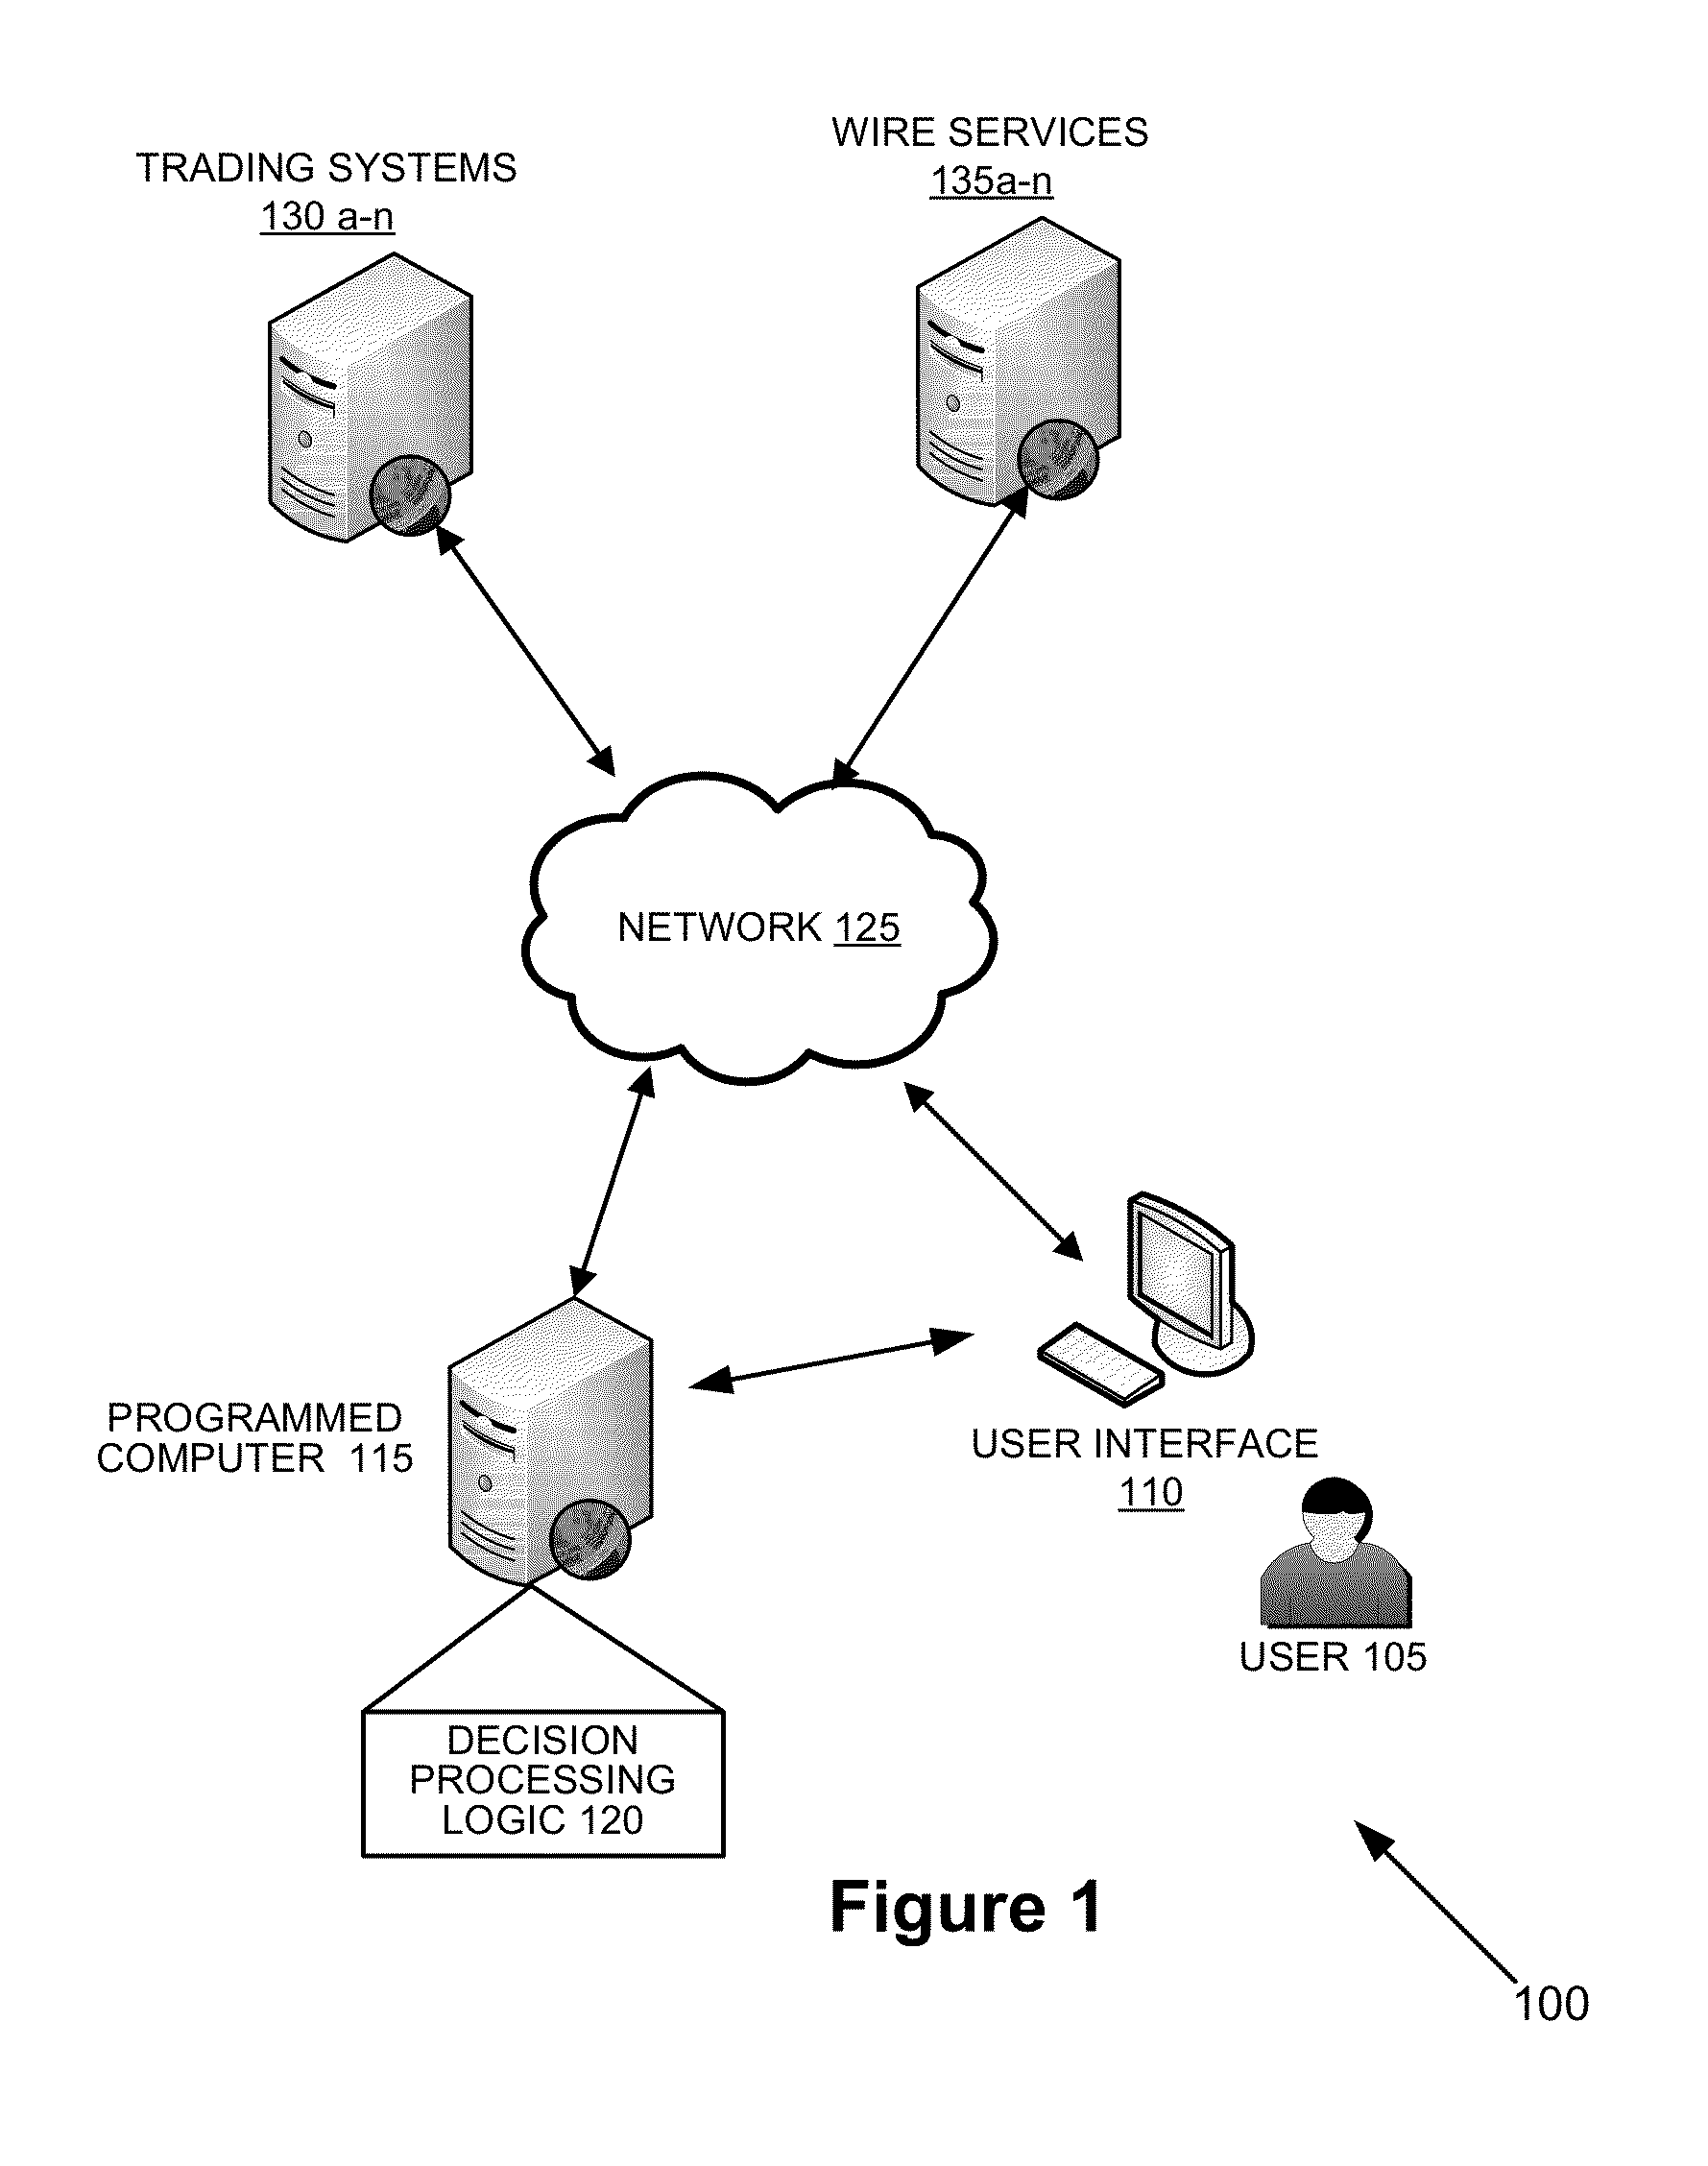 Method for automated trading based on information in a press release